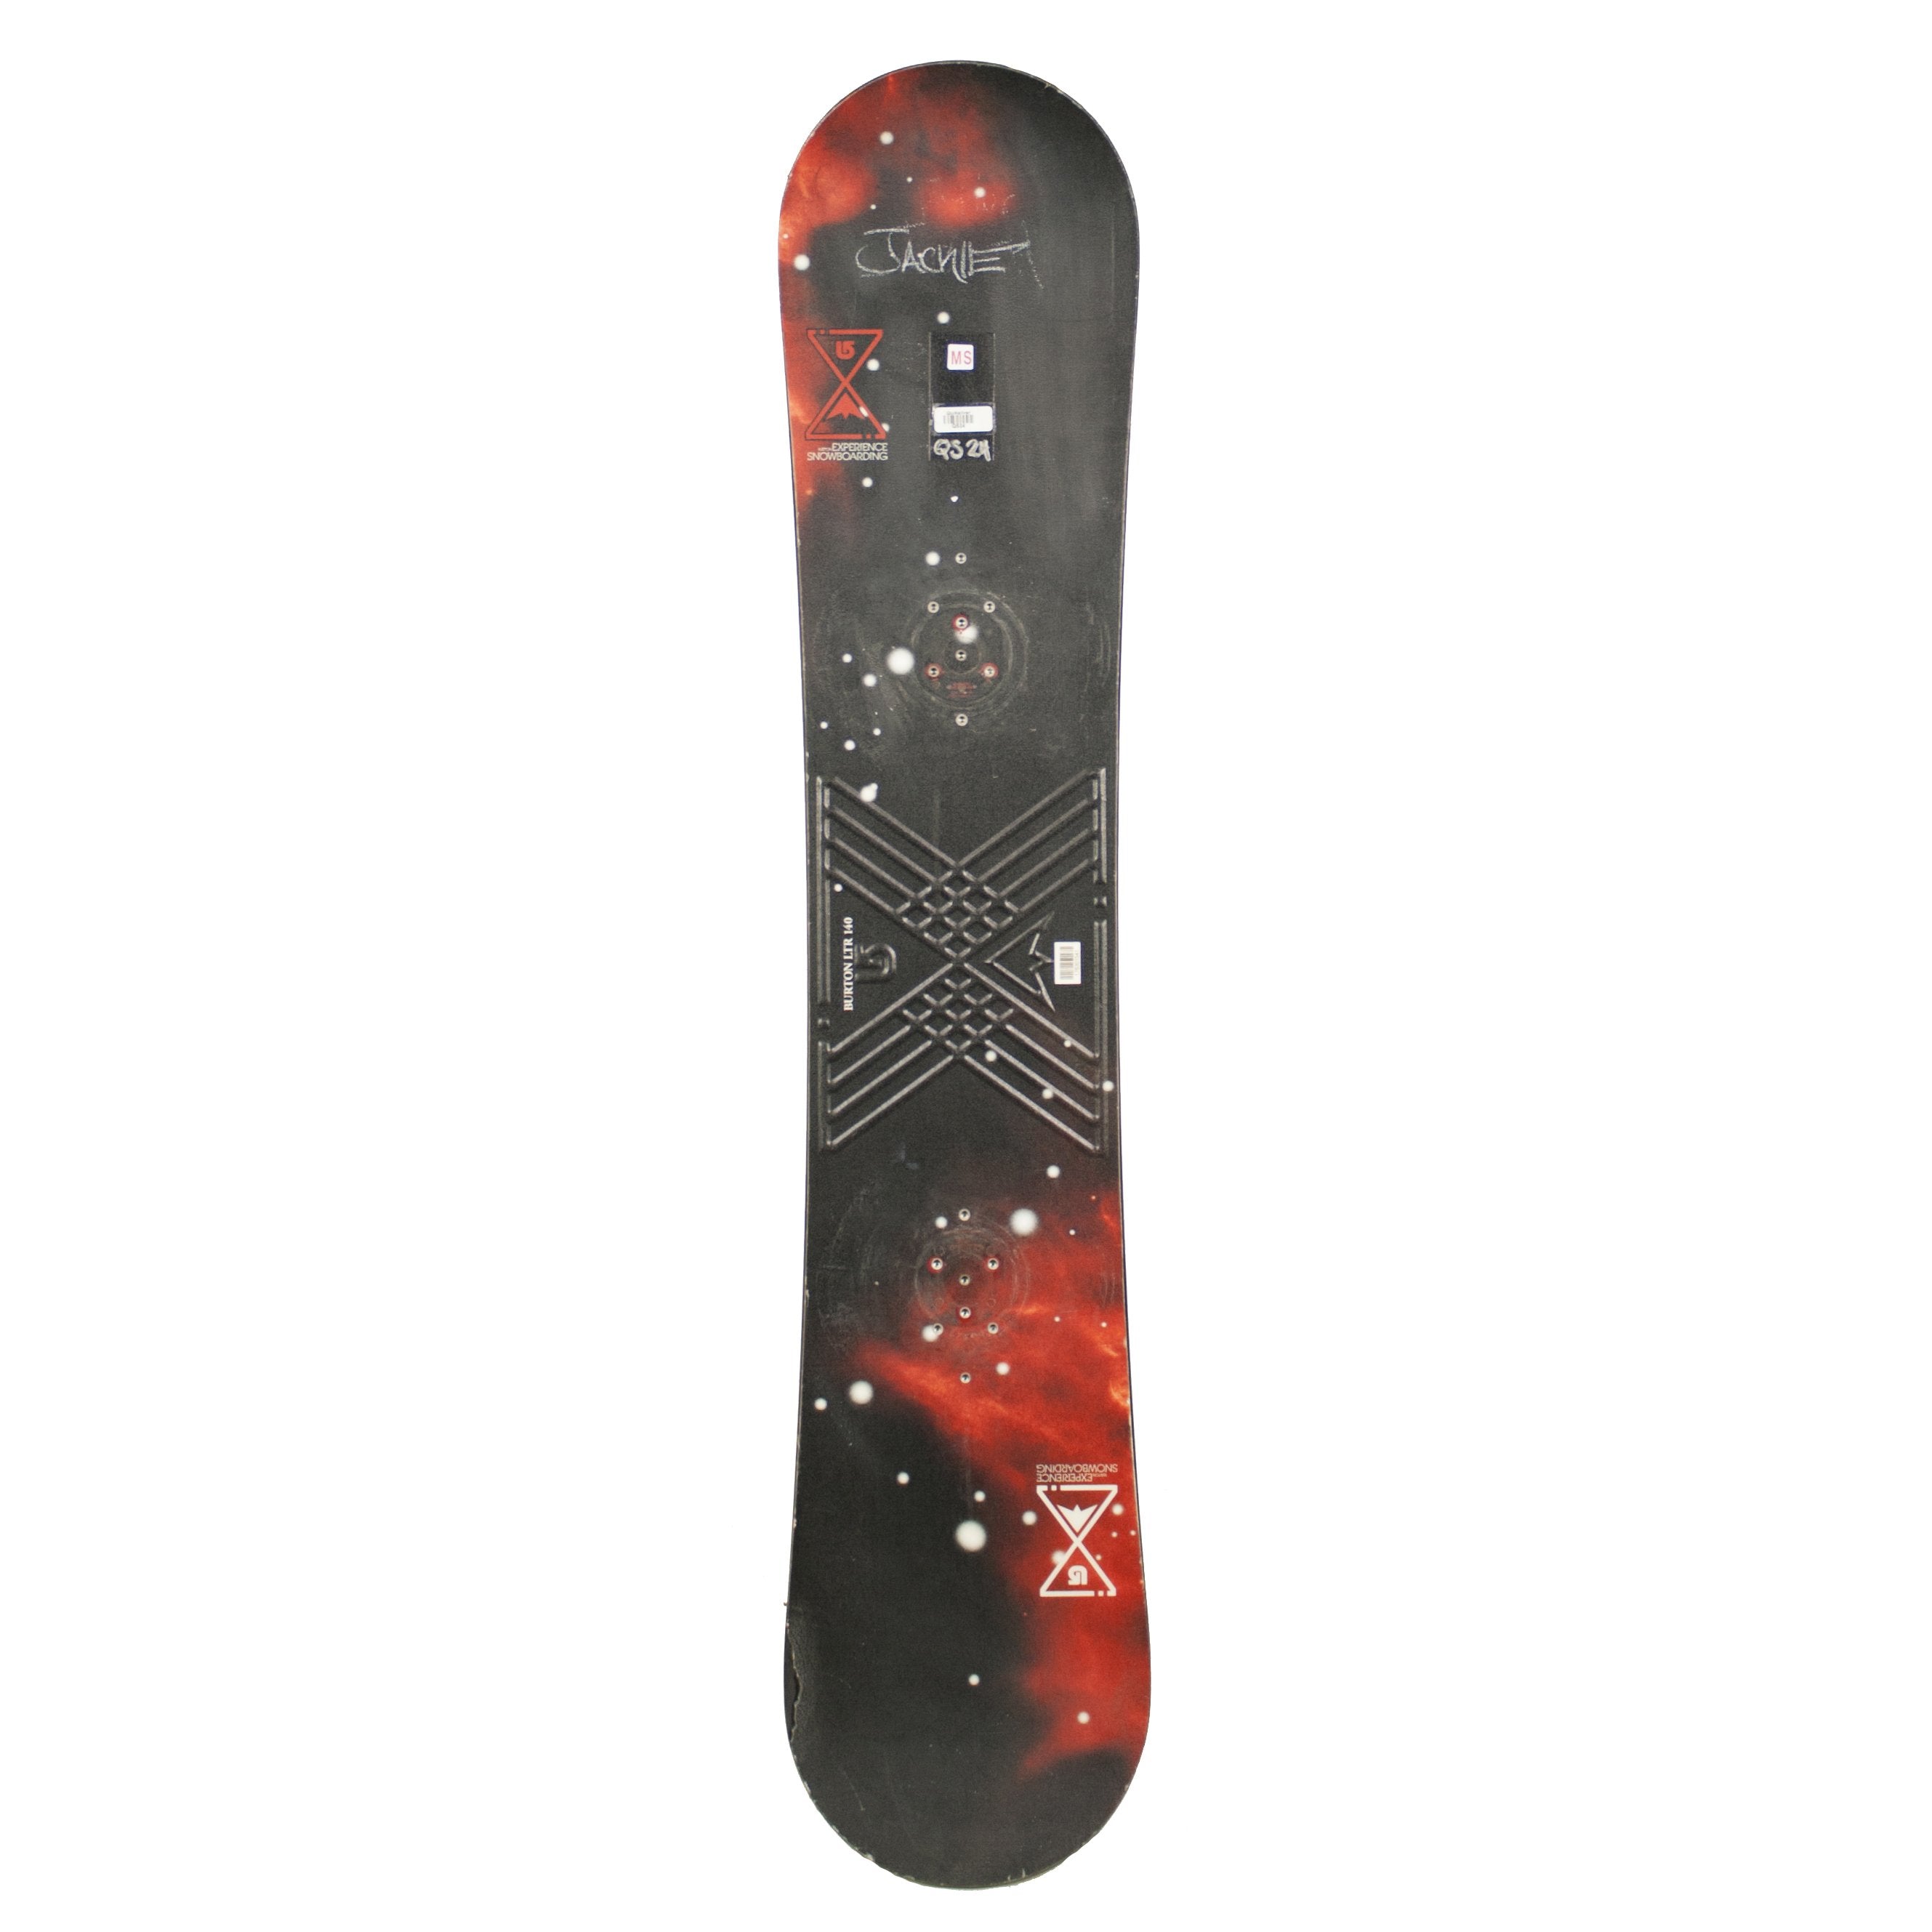 methaan duif duurzame grondstof Used Burton LTR Experience Snowboard D - Galactic Snow Sports